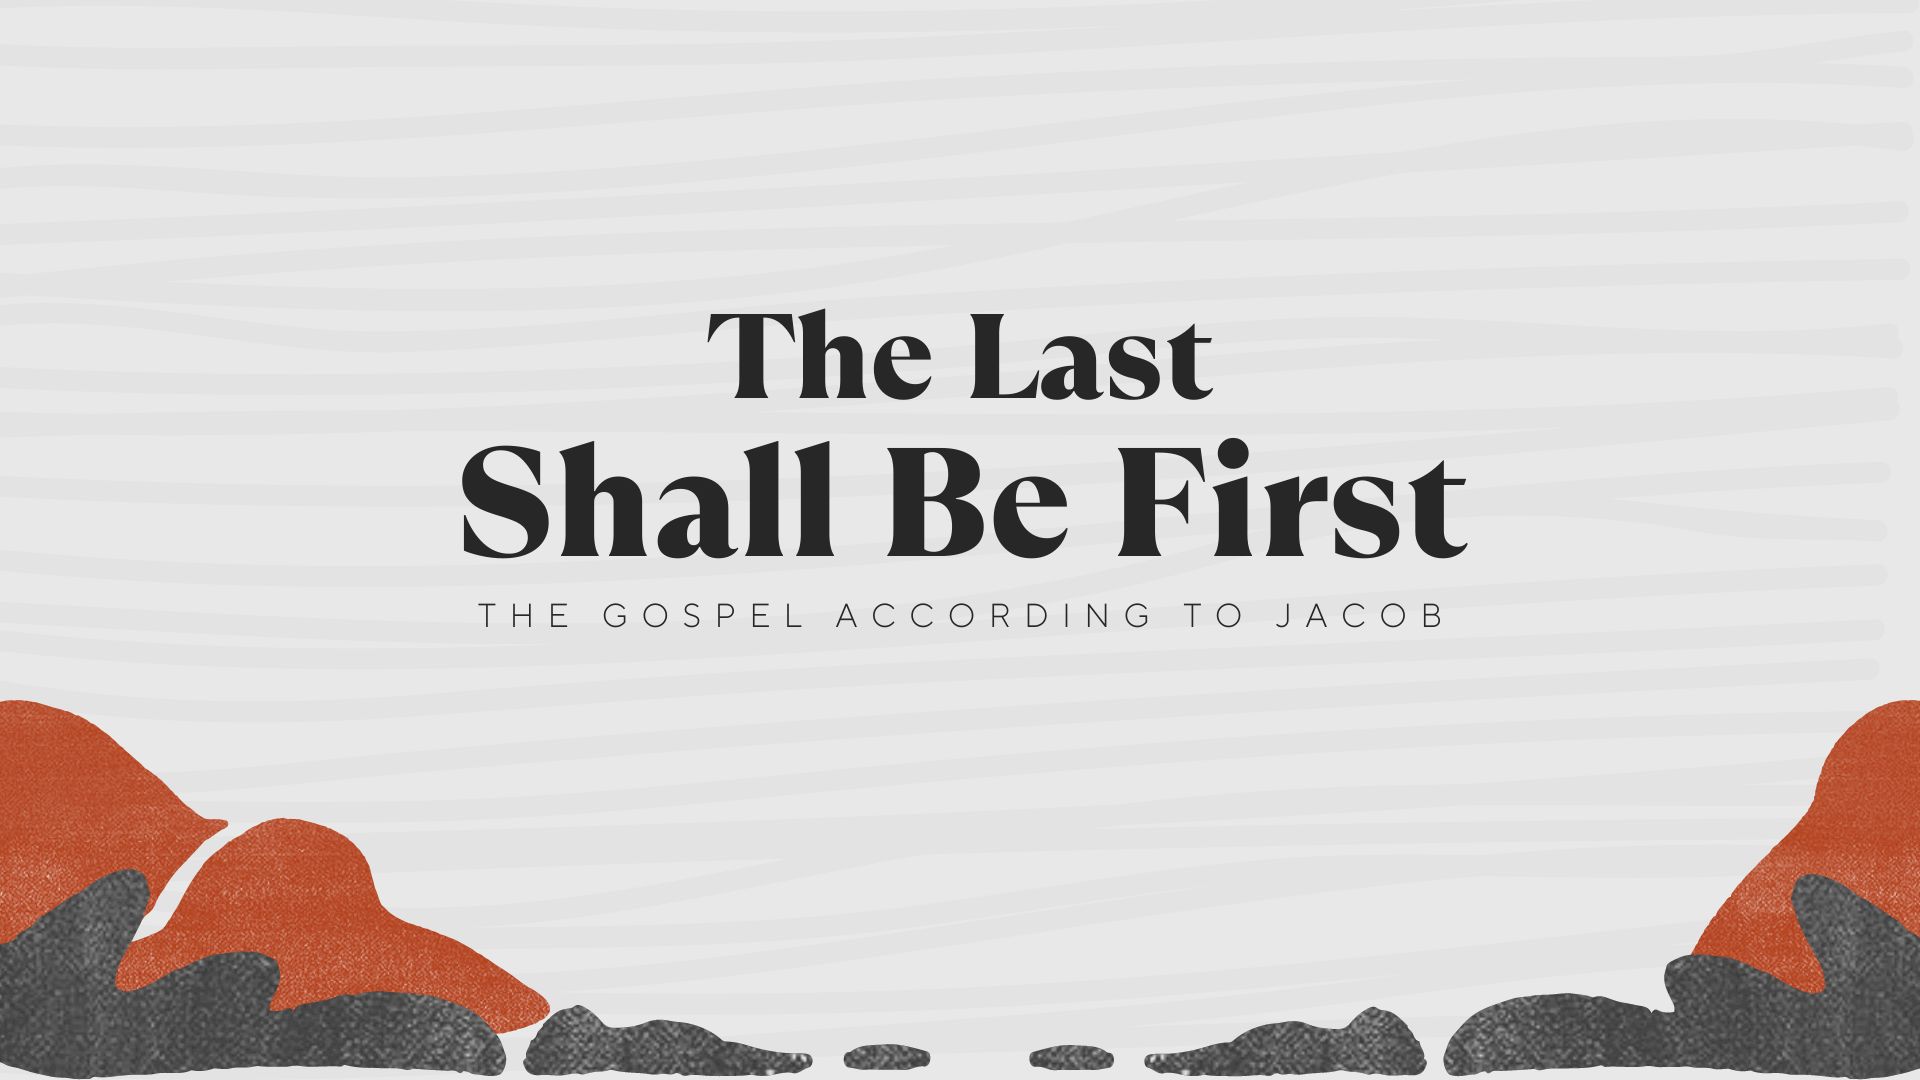 The Last Shall Be First: Battle of Wits